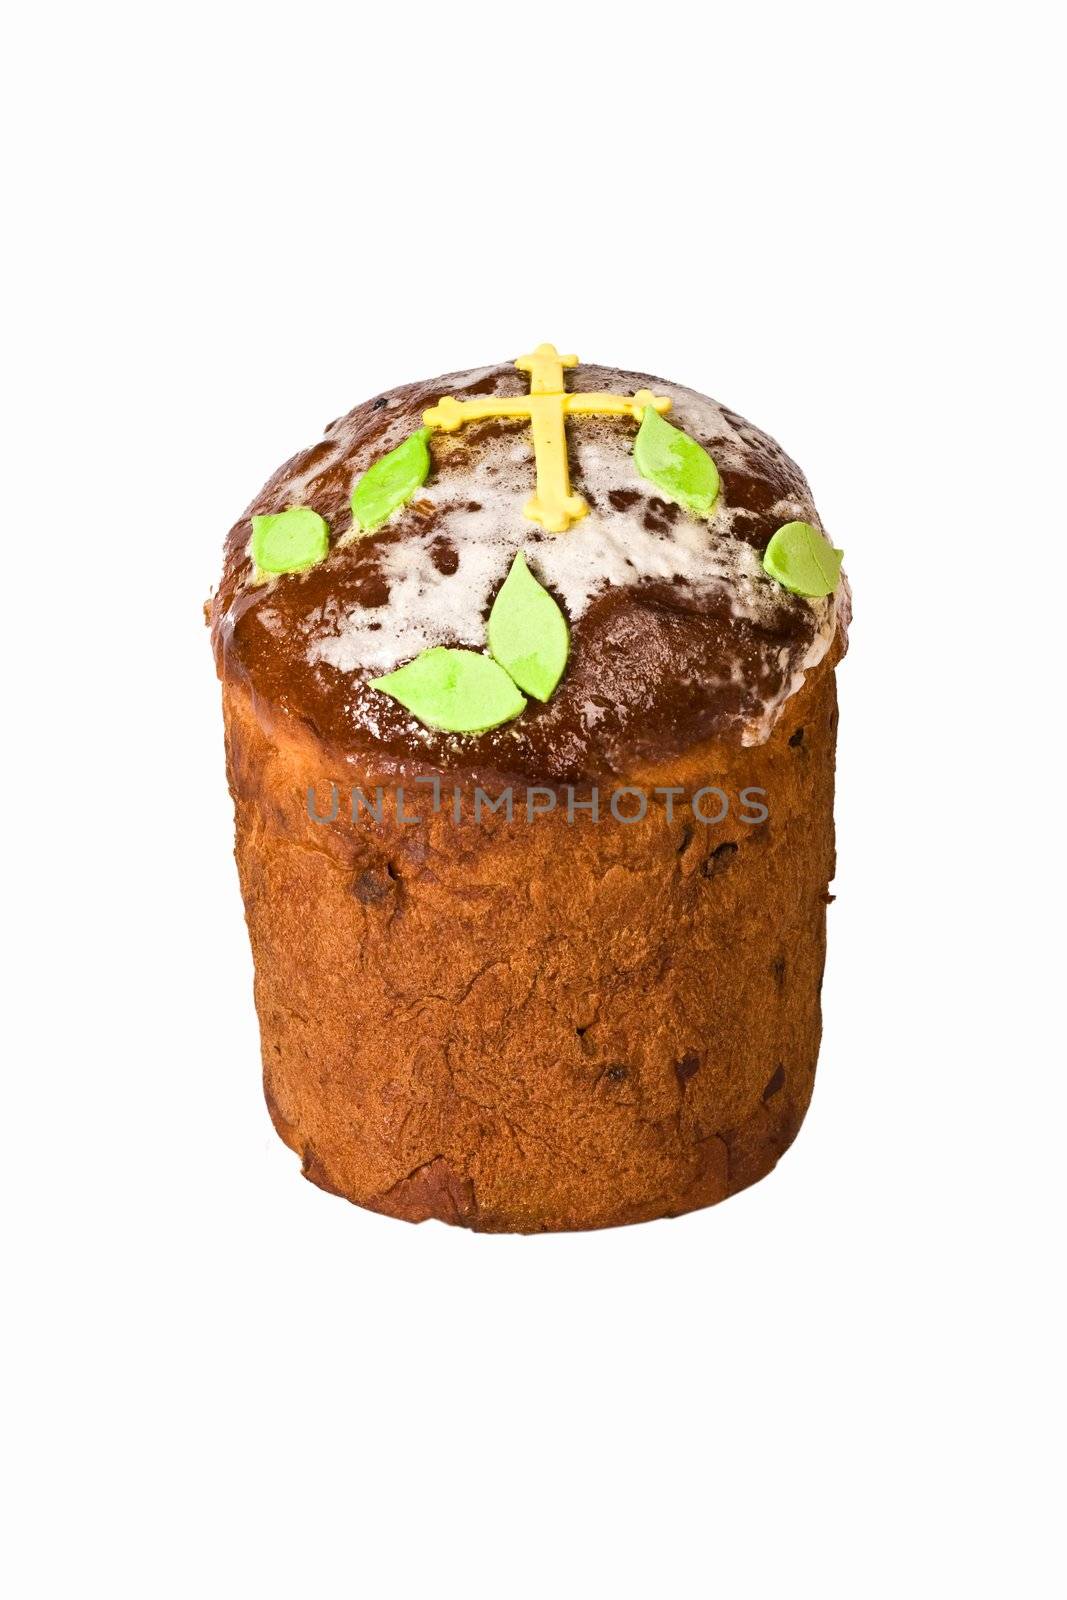 holiday object: easter cake over white background